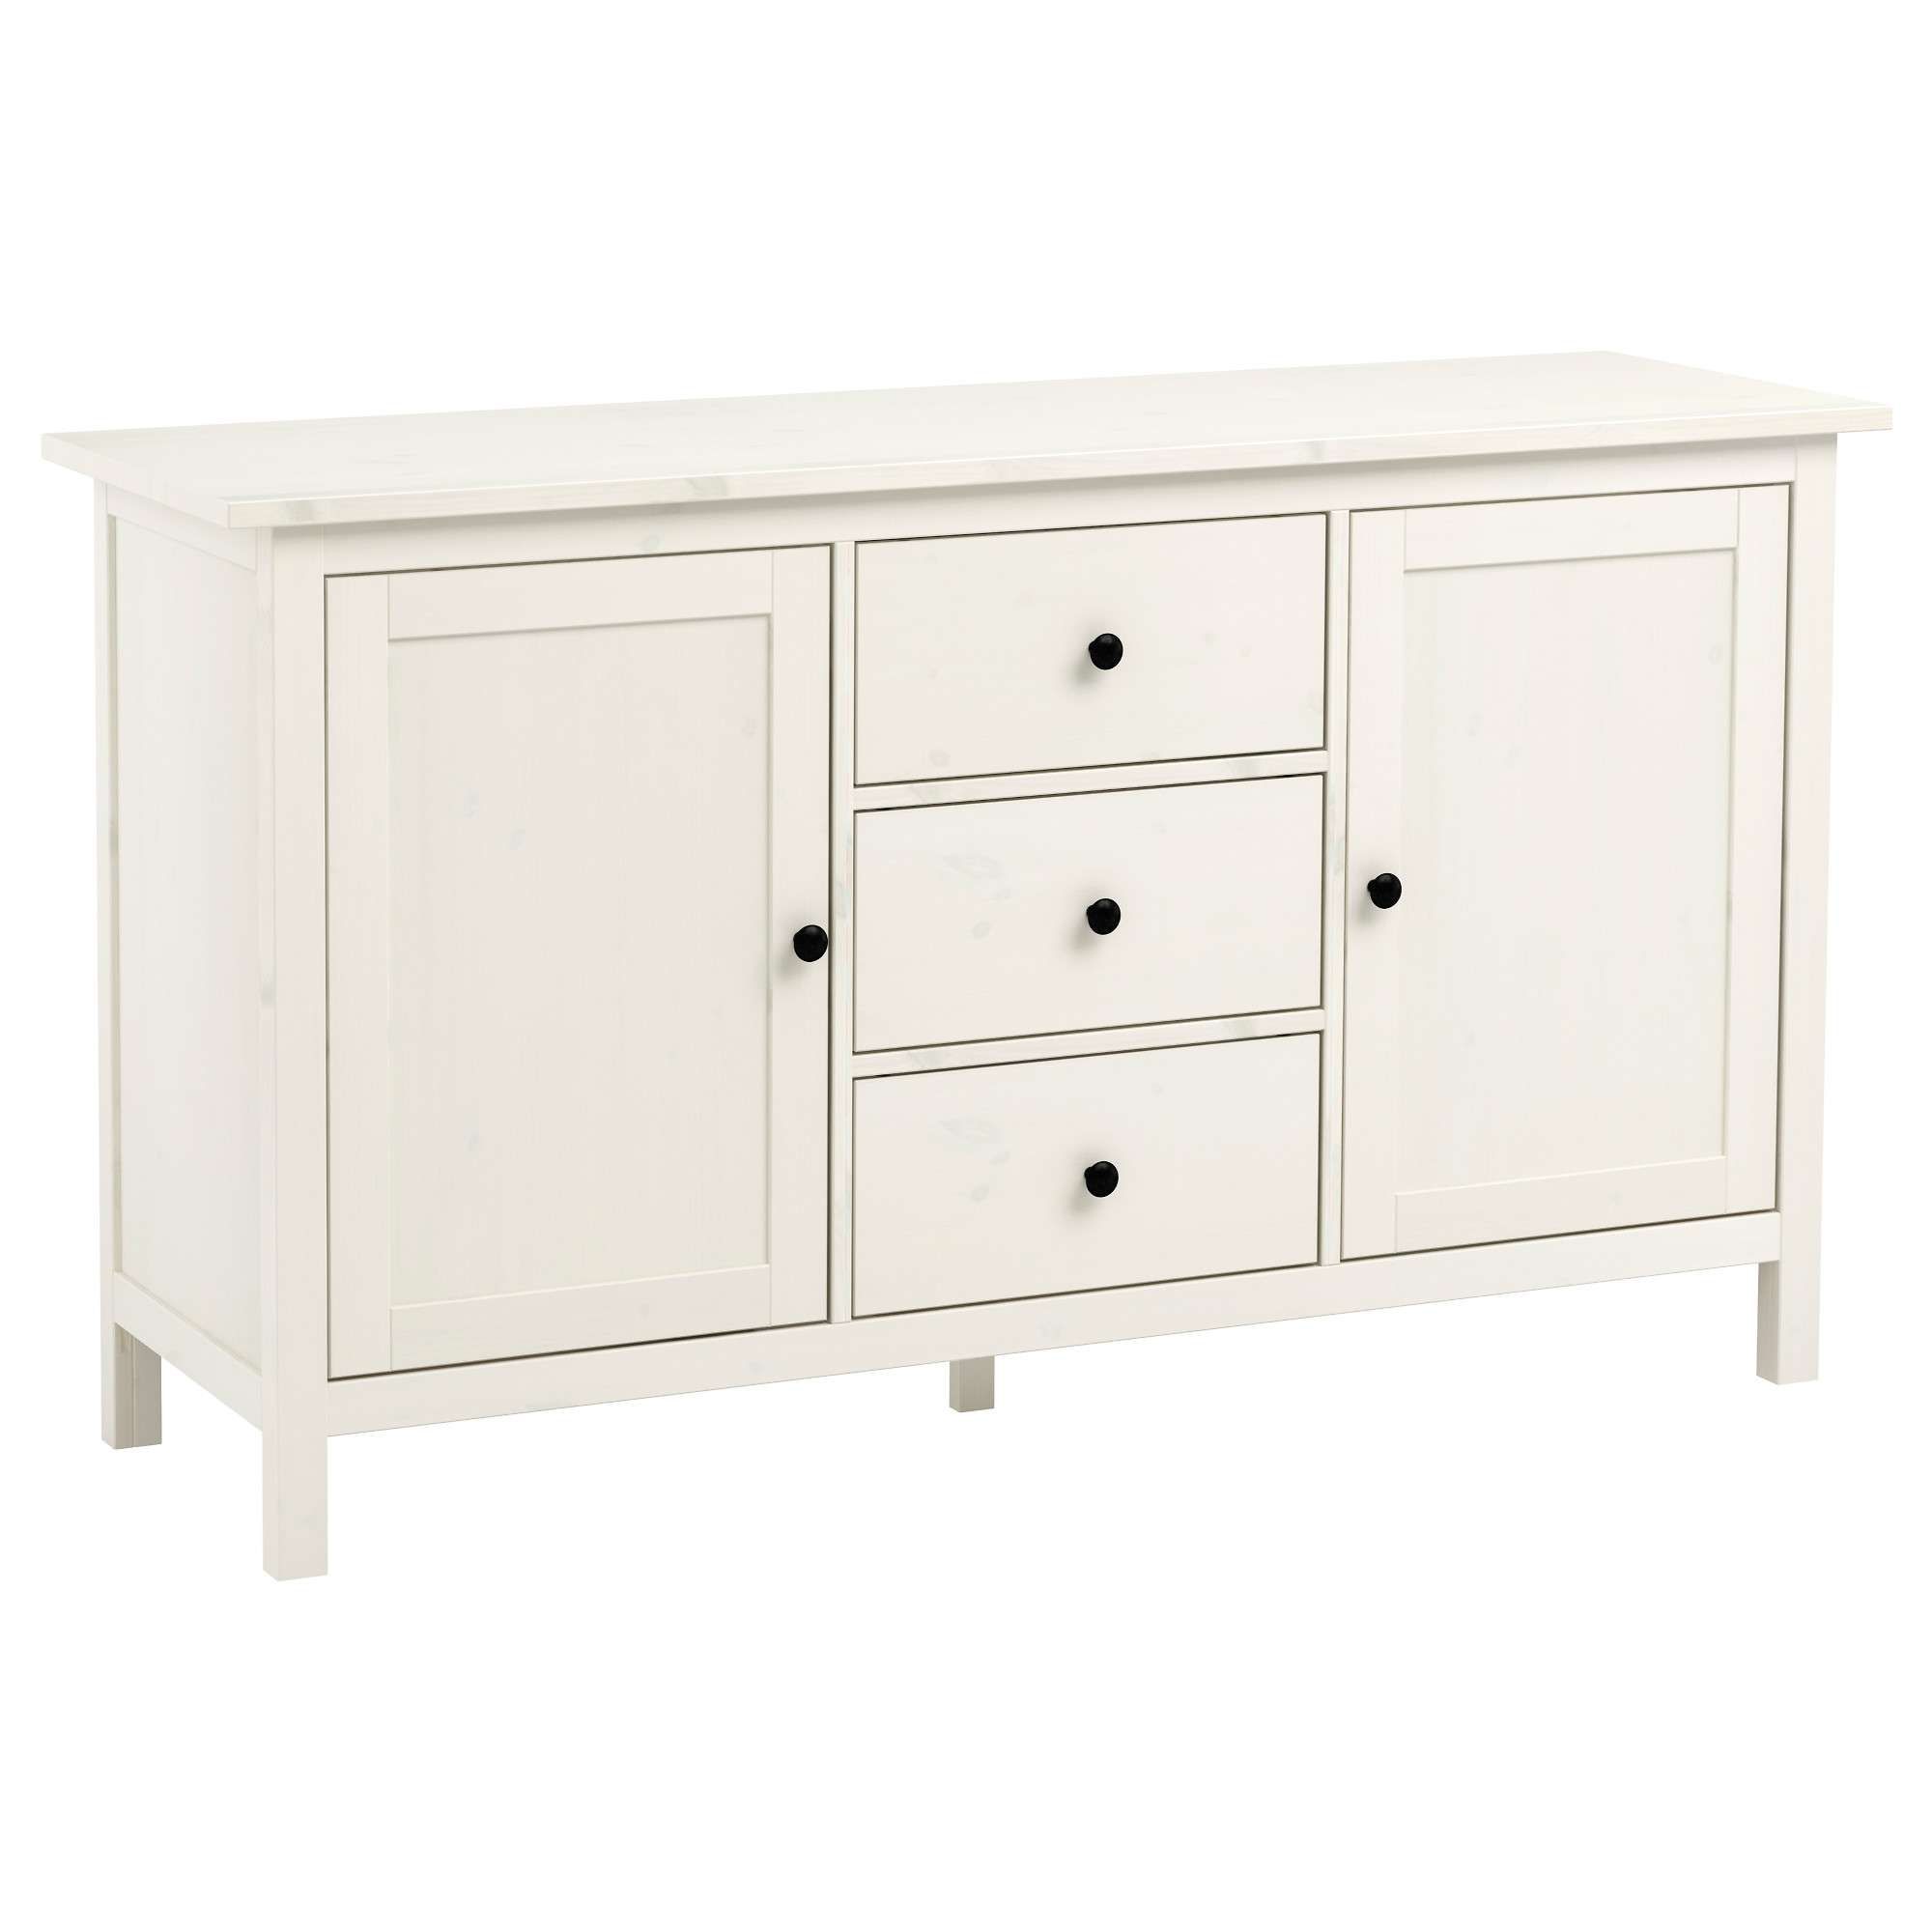 Console Tables, Sofa Tables & Sideboards – Ikea Pertaining To Cream Kitchen Sideboards (View 13 of 20)